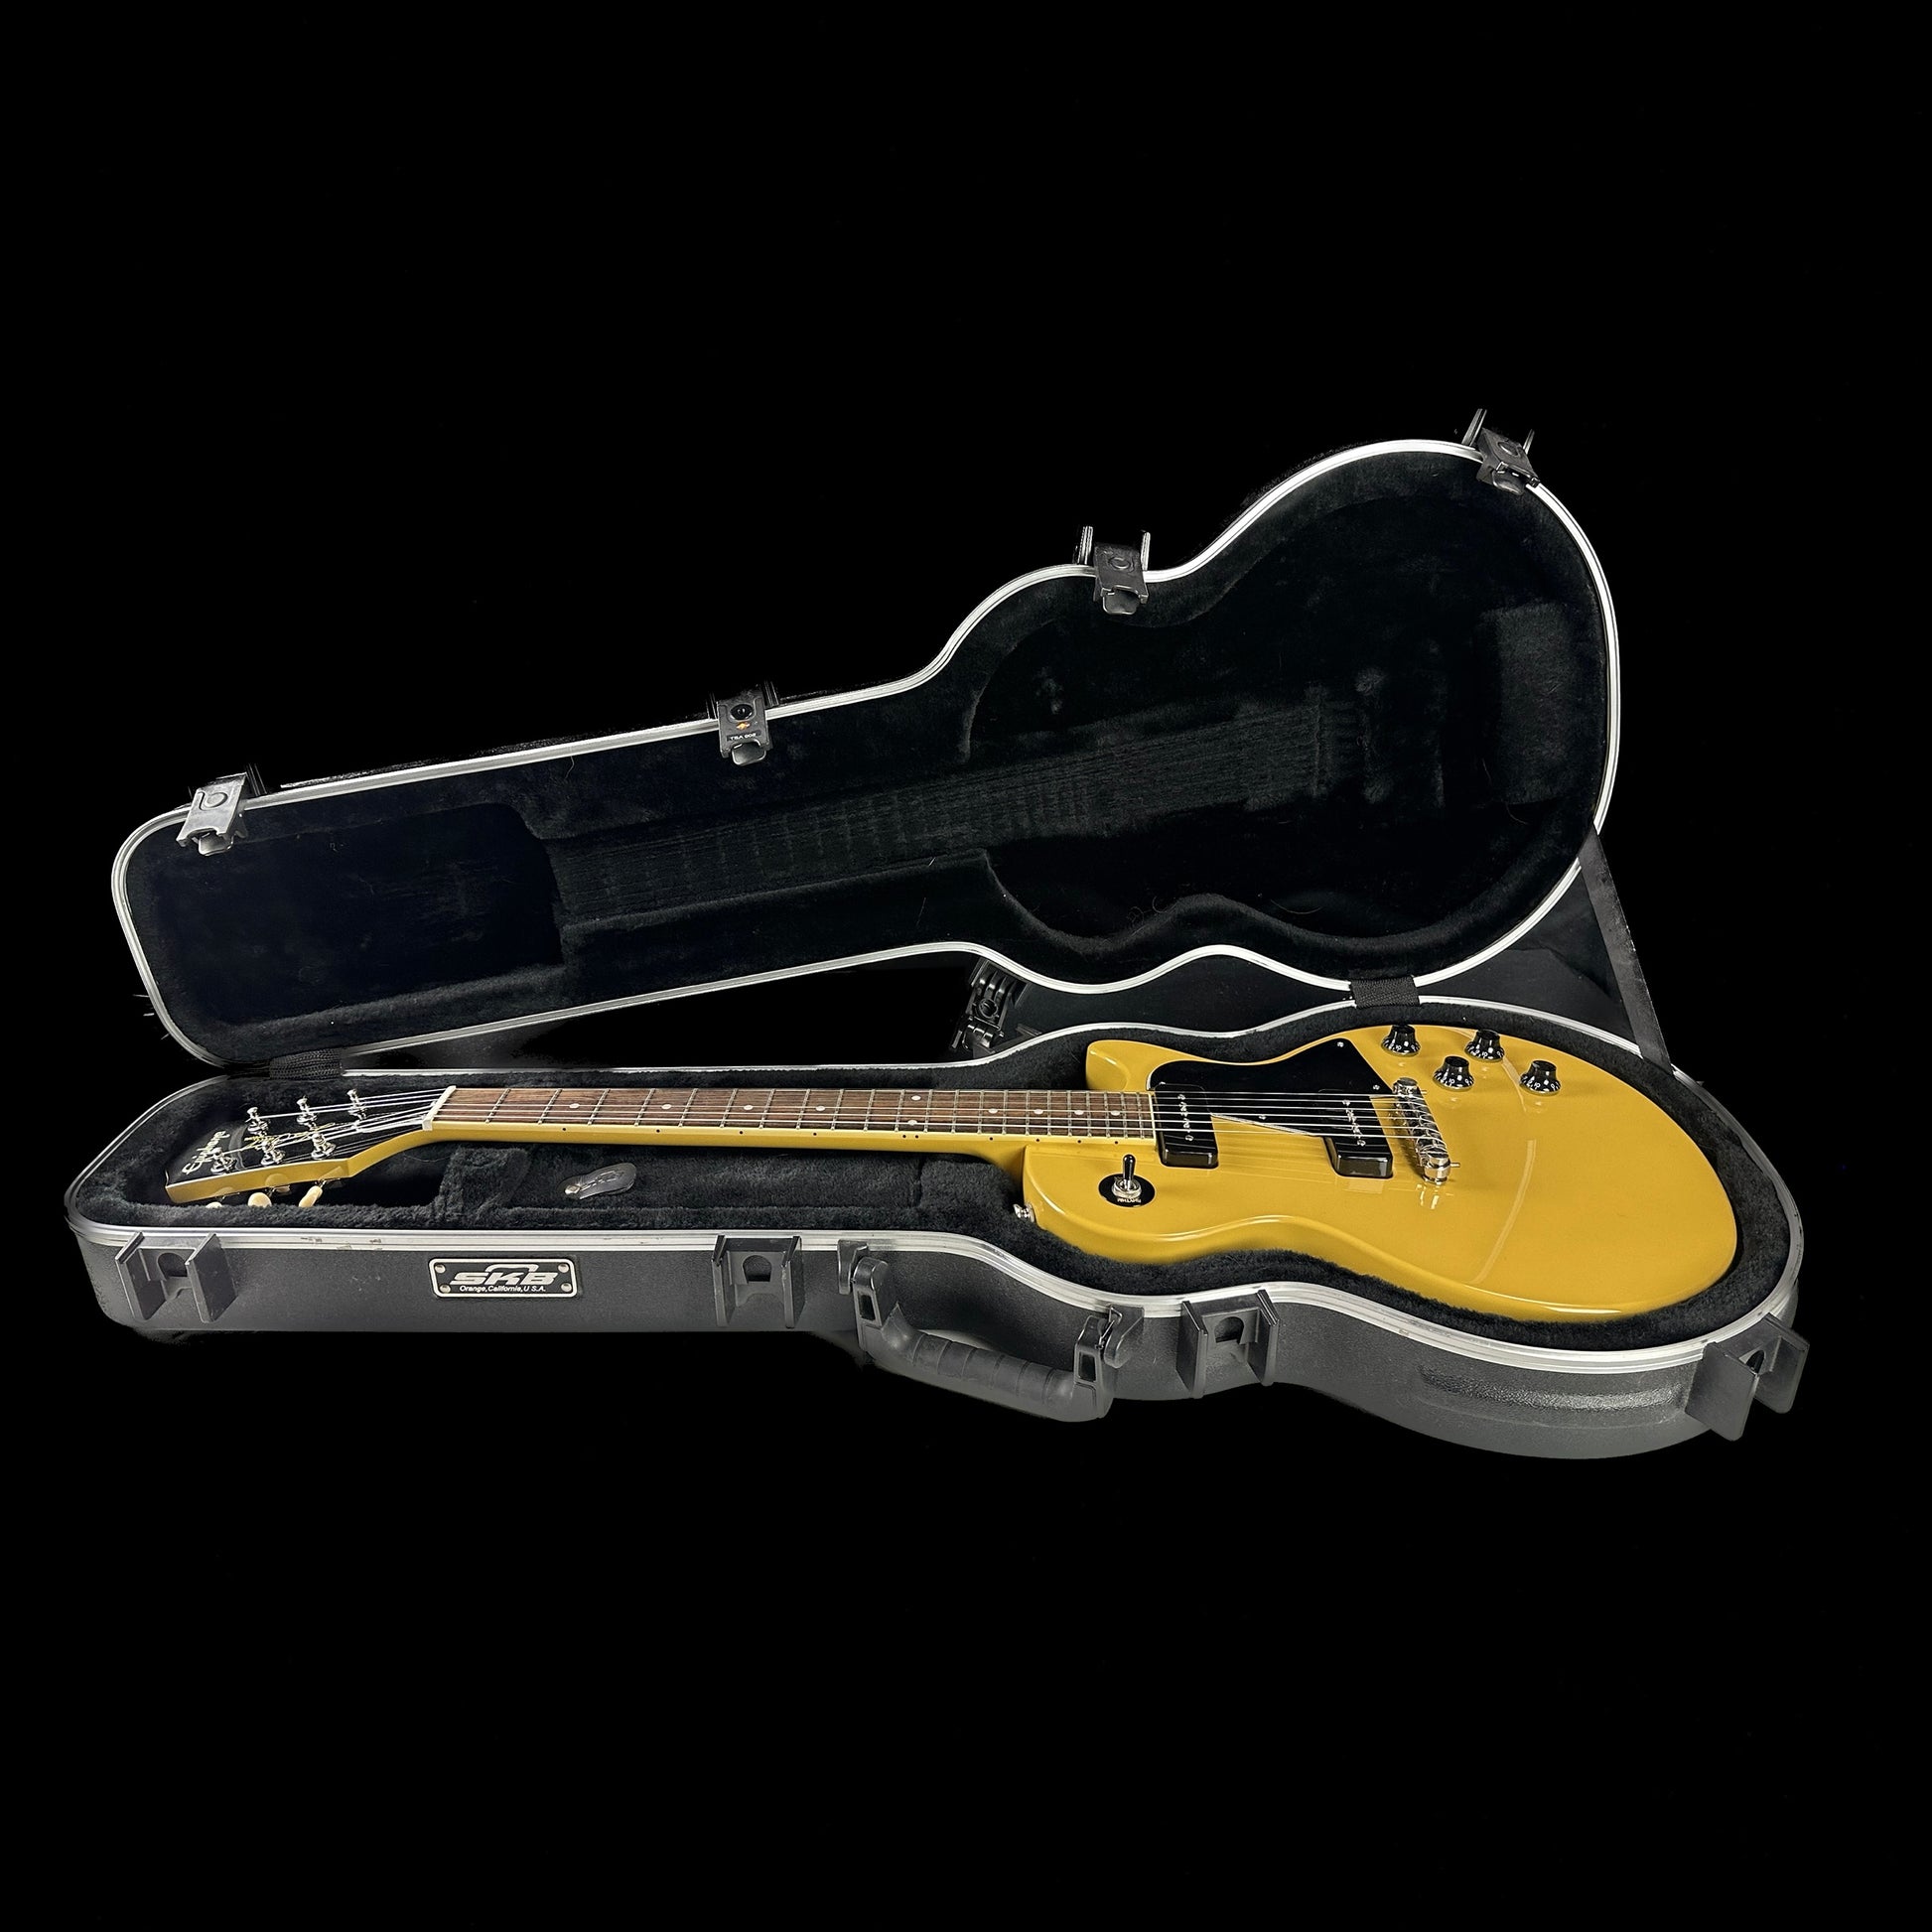 Used Epiphone Les Paul Special TV Yellow in case.